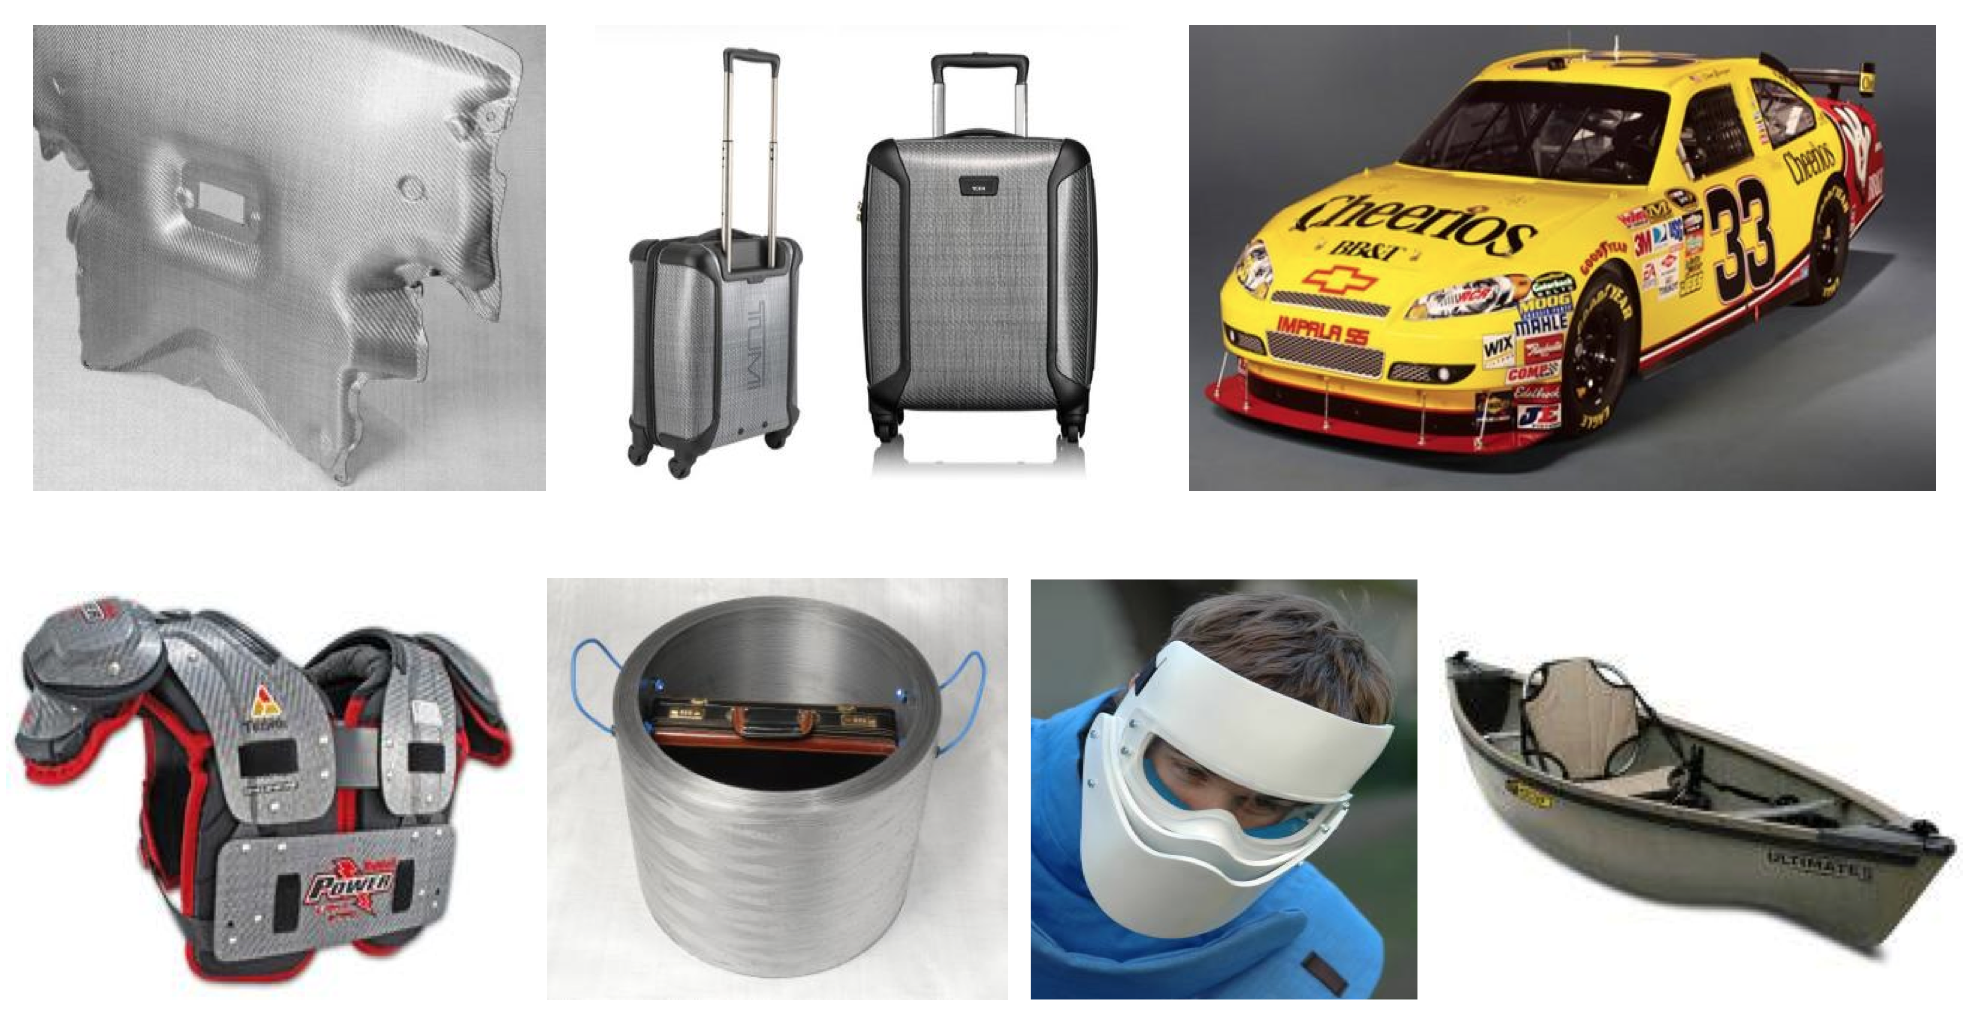 Self-reinforced polypropylene composites based on co-extruded tape technology (PURE and Tegris) are
being used for a wide range of applications incl. (from top left to bottom right) automotive undershields,luggage, motor racing parts, protective sports gear, bomb baskets, de-mining mask and kayaks.